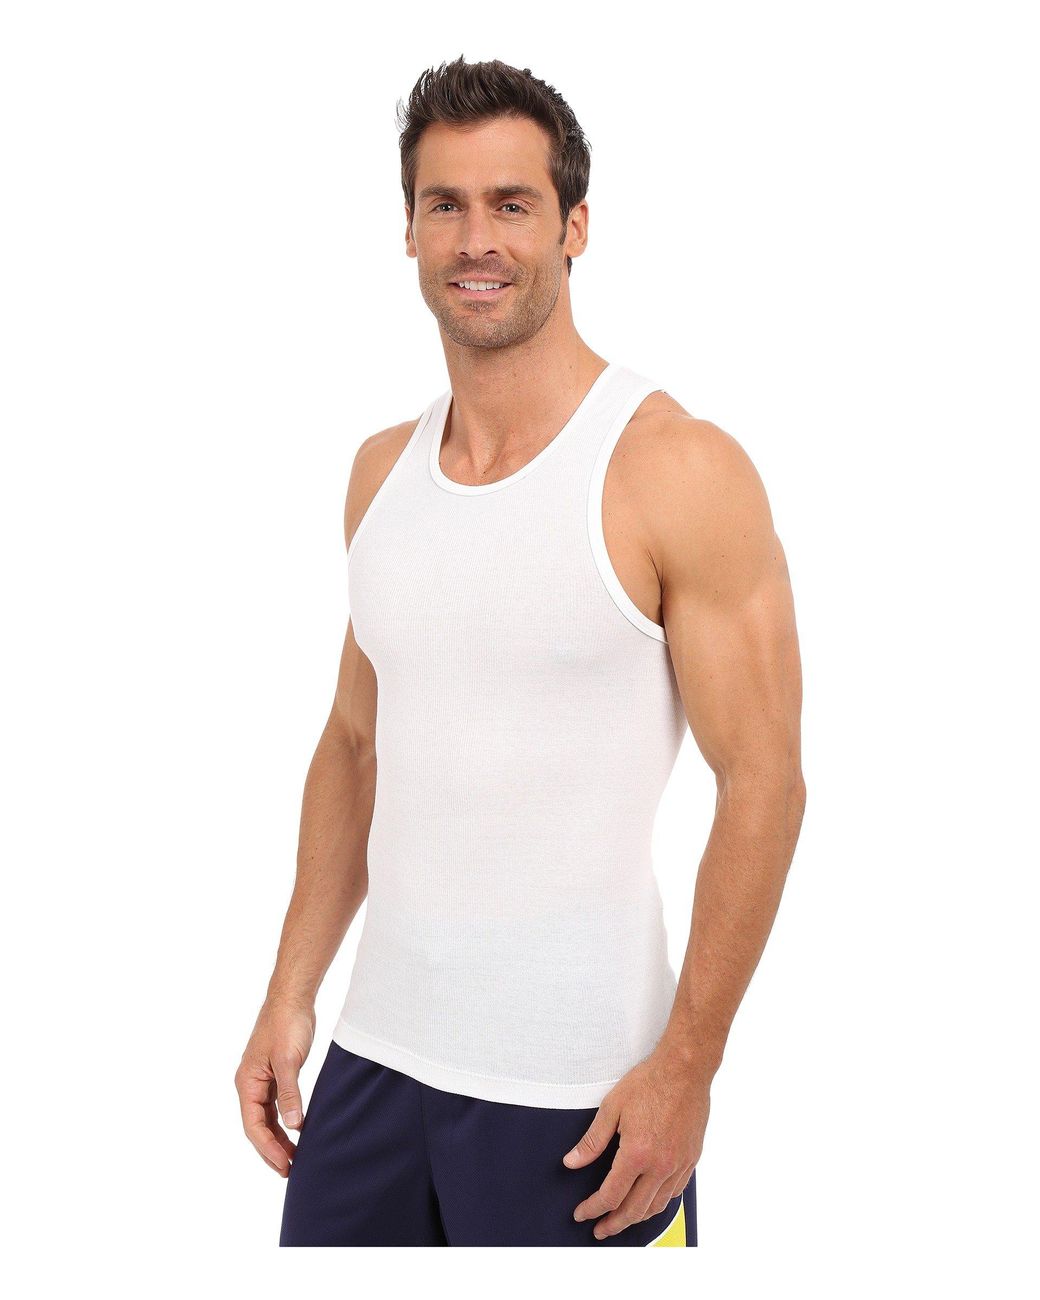 https://cdna.lystit.com/1040/1300/n/photos/zappos/57ffcd98/adidas-White-Athletic-Comfort-3-pack-Ribbed-Tank-Top.jpeg